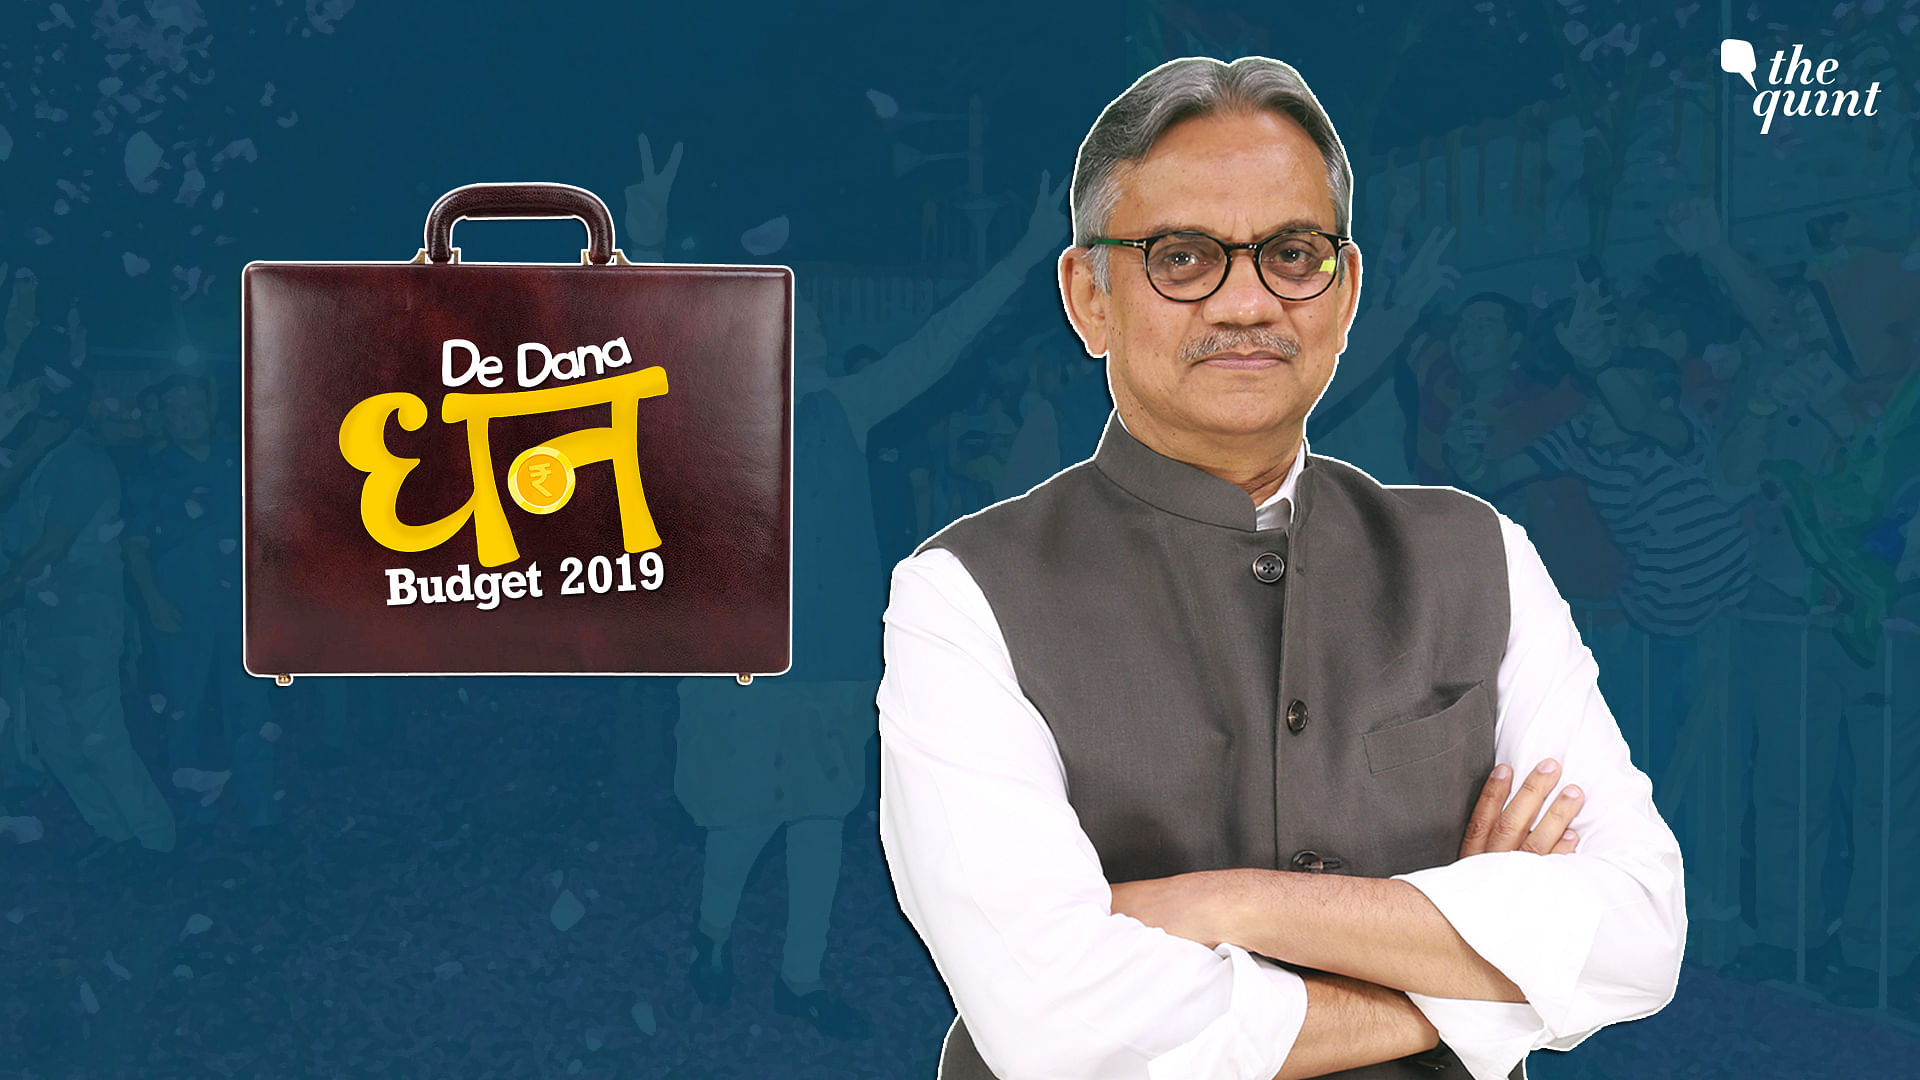 The Quint’s Editorial Director, Sanjay Pugalia on Budget 2019.